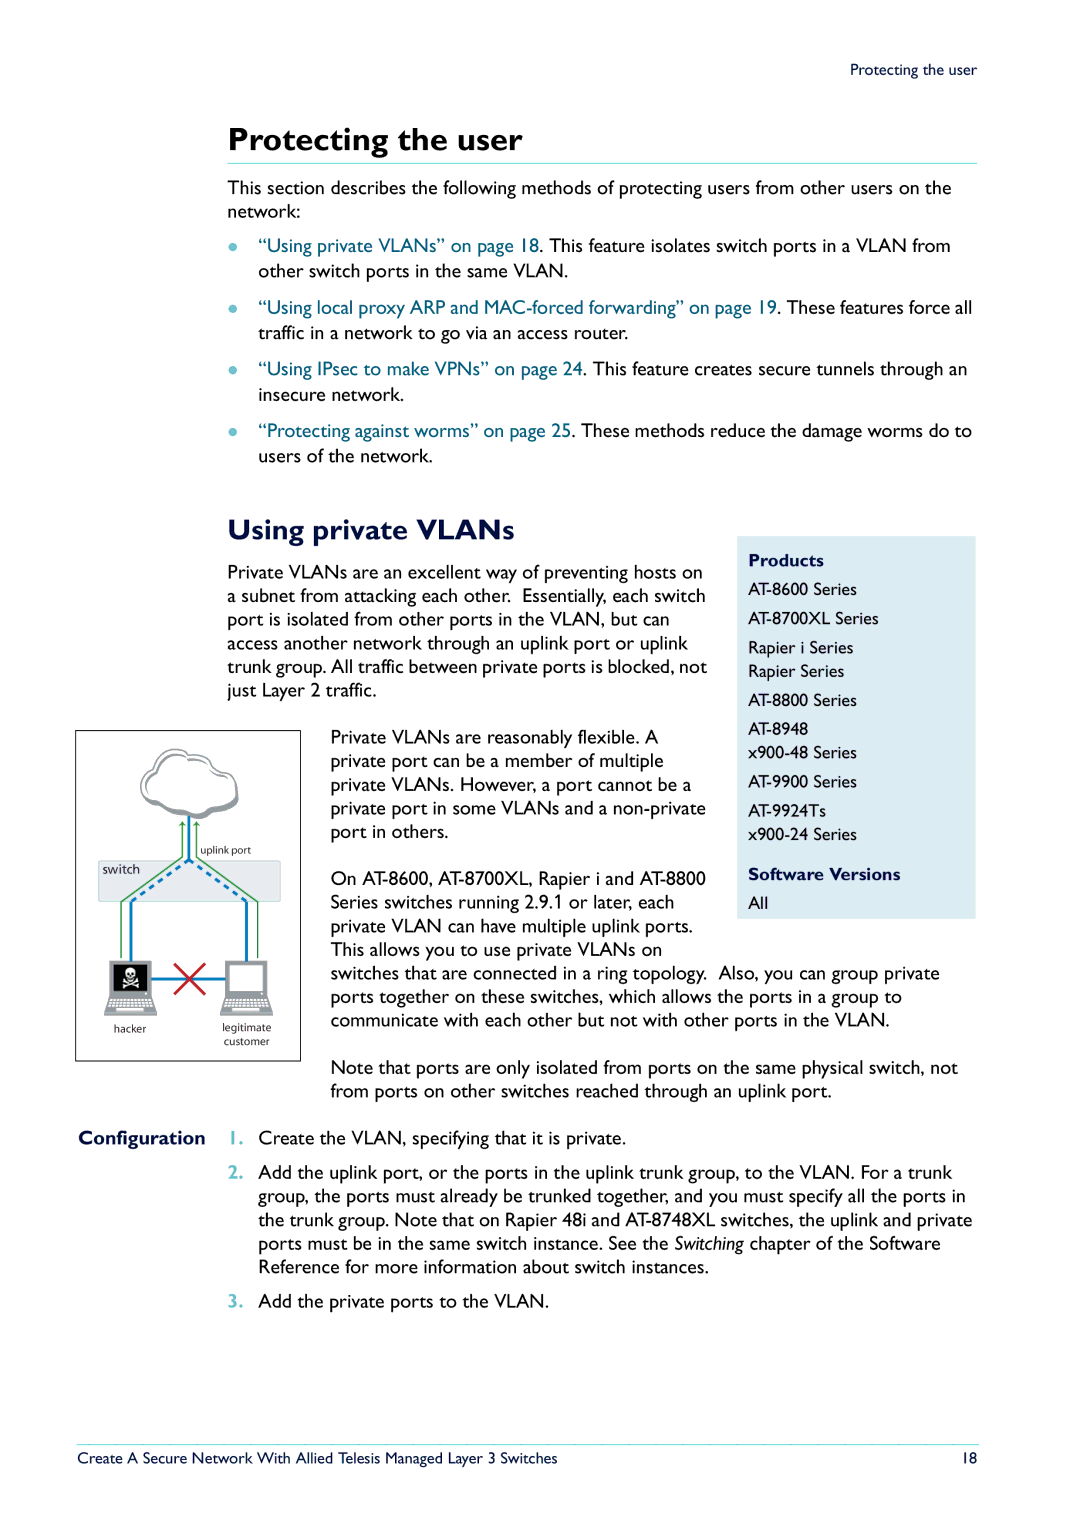 Allied Telesis Layer 3 Switches manual Protecting the user, Using private VLANs 